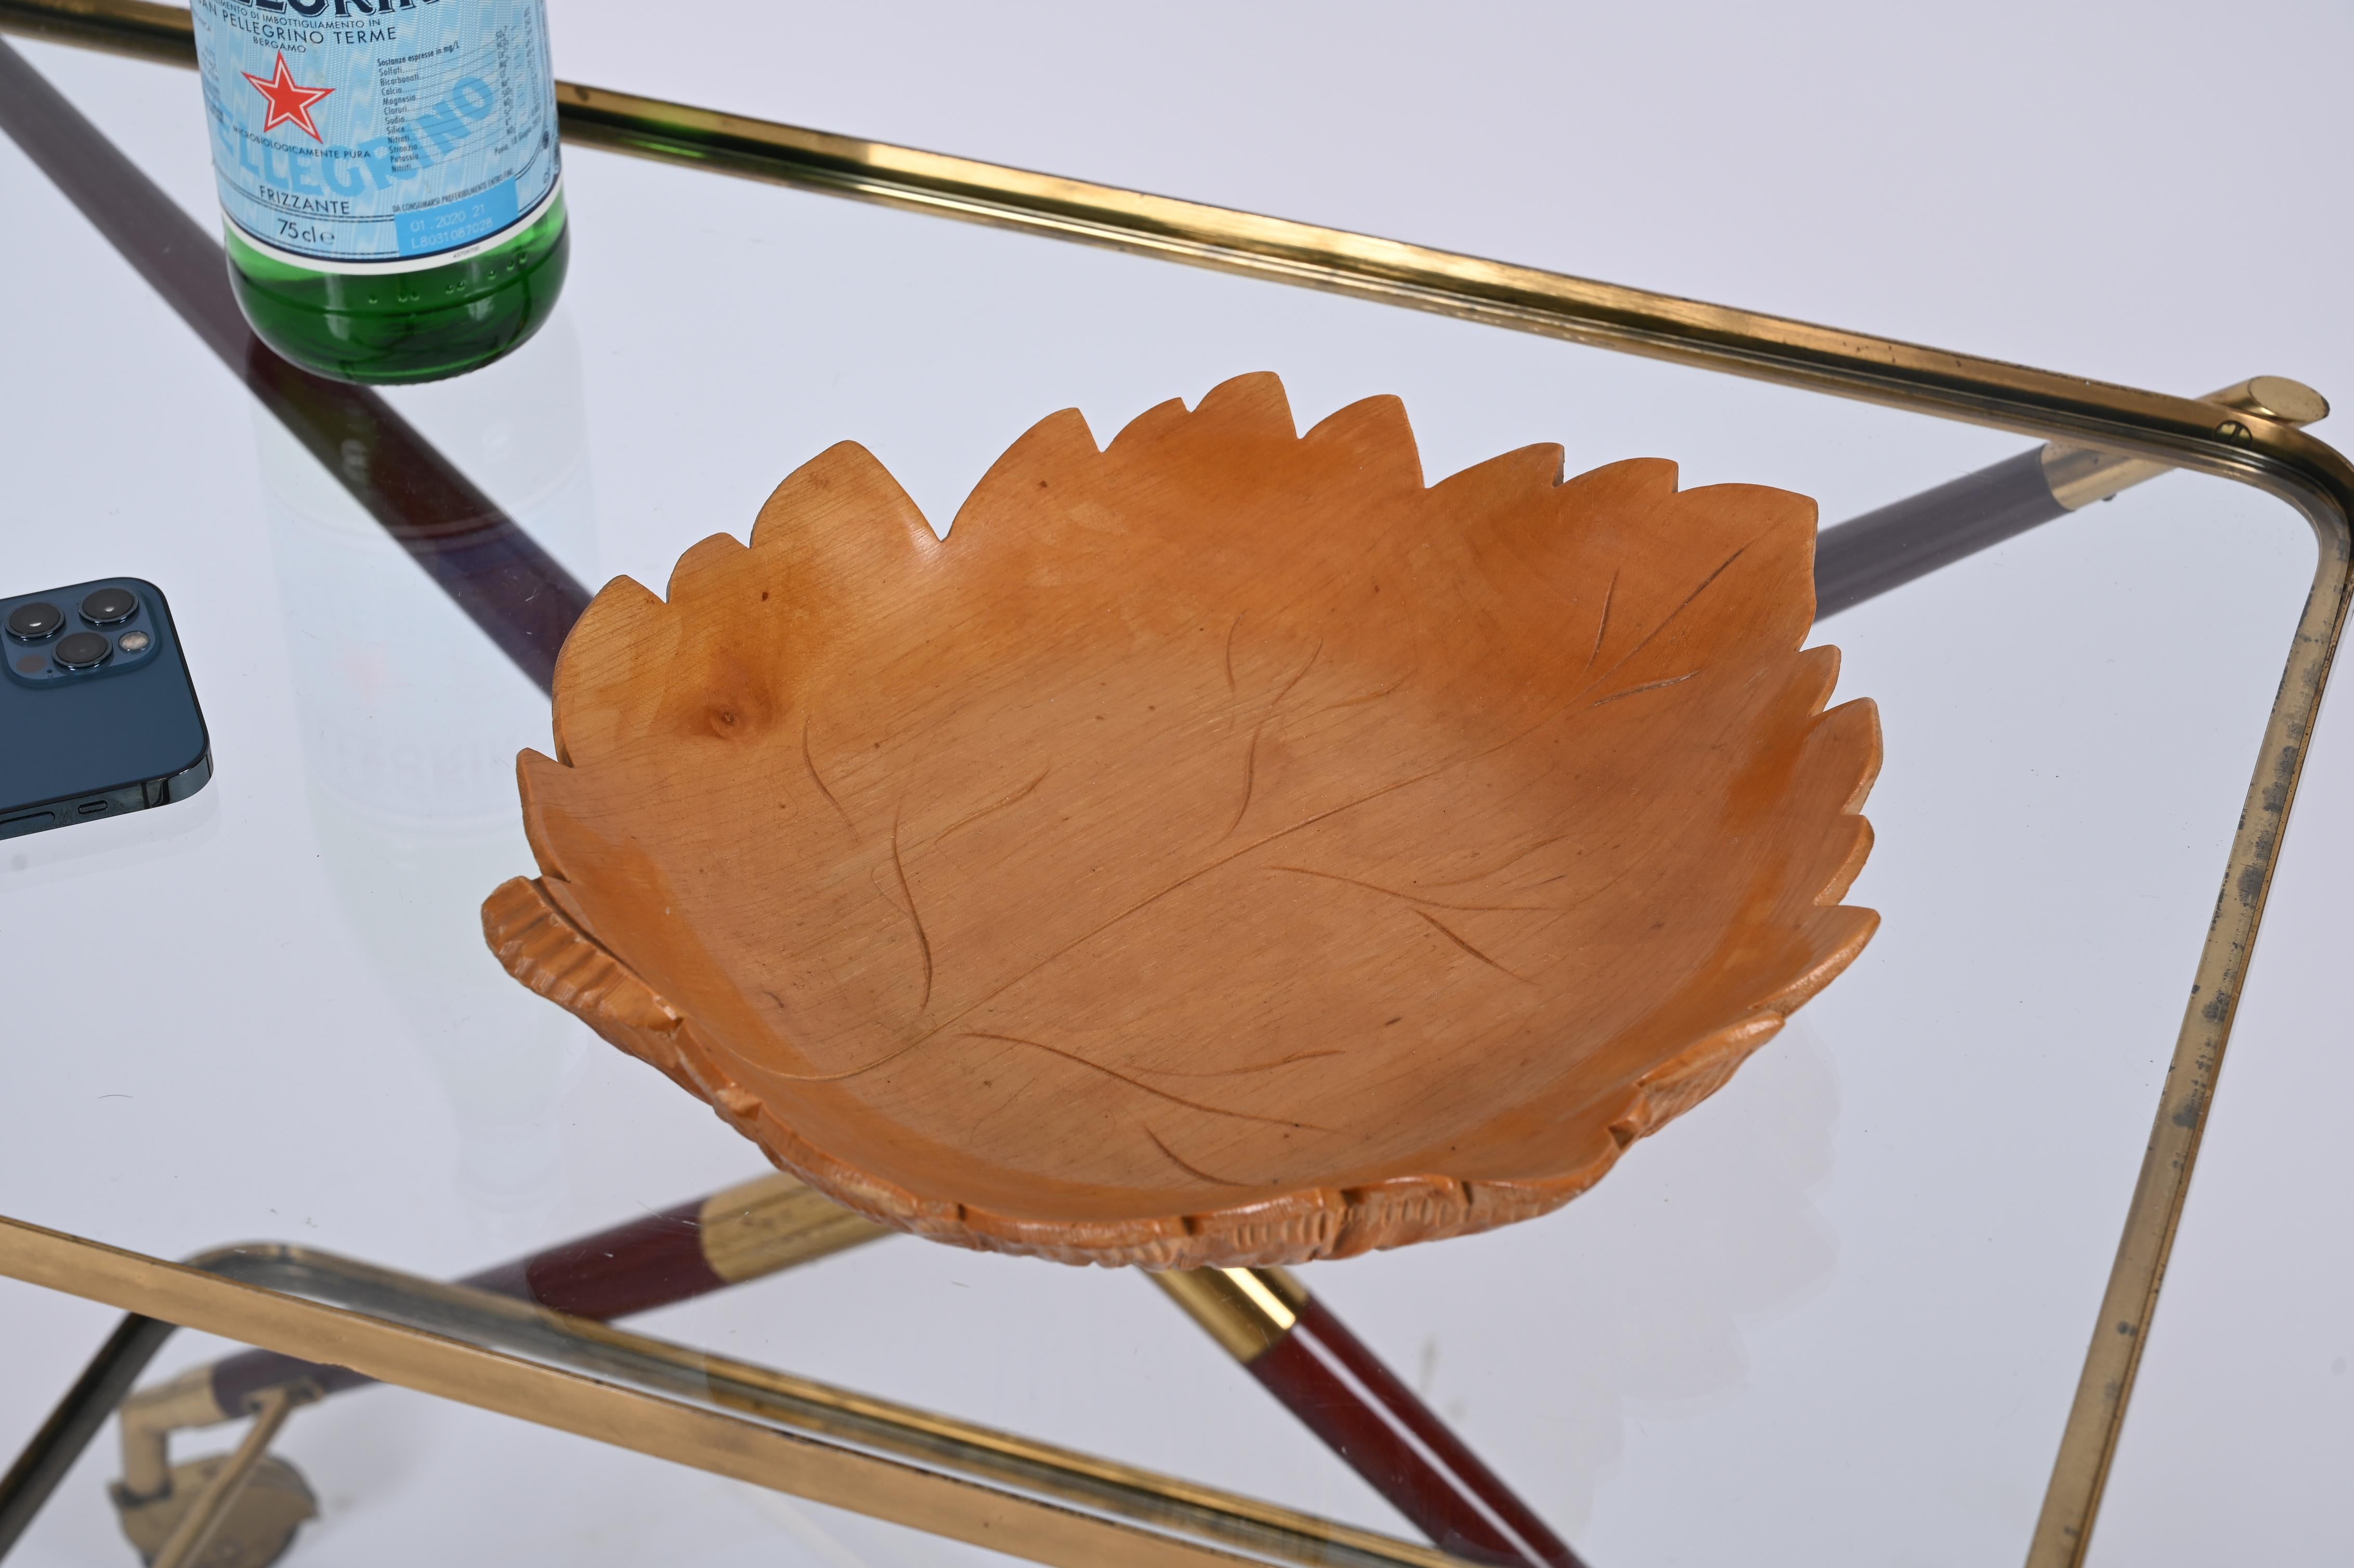 Wonderful midcentury handmade birchwood maple leaf-shaped centrepiece. This beautiful piece is signed by Macabo on the back and it was probably designed by Aldo Tura in the 1950s in Italy. 

This decorative bowl is special as it was hand-carved in